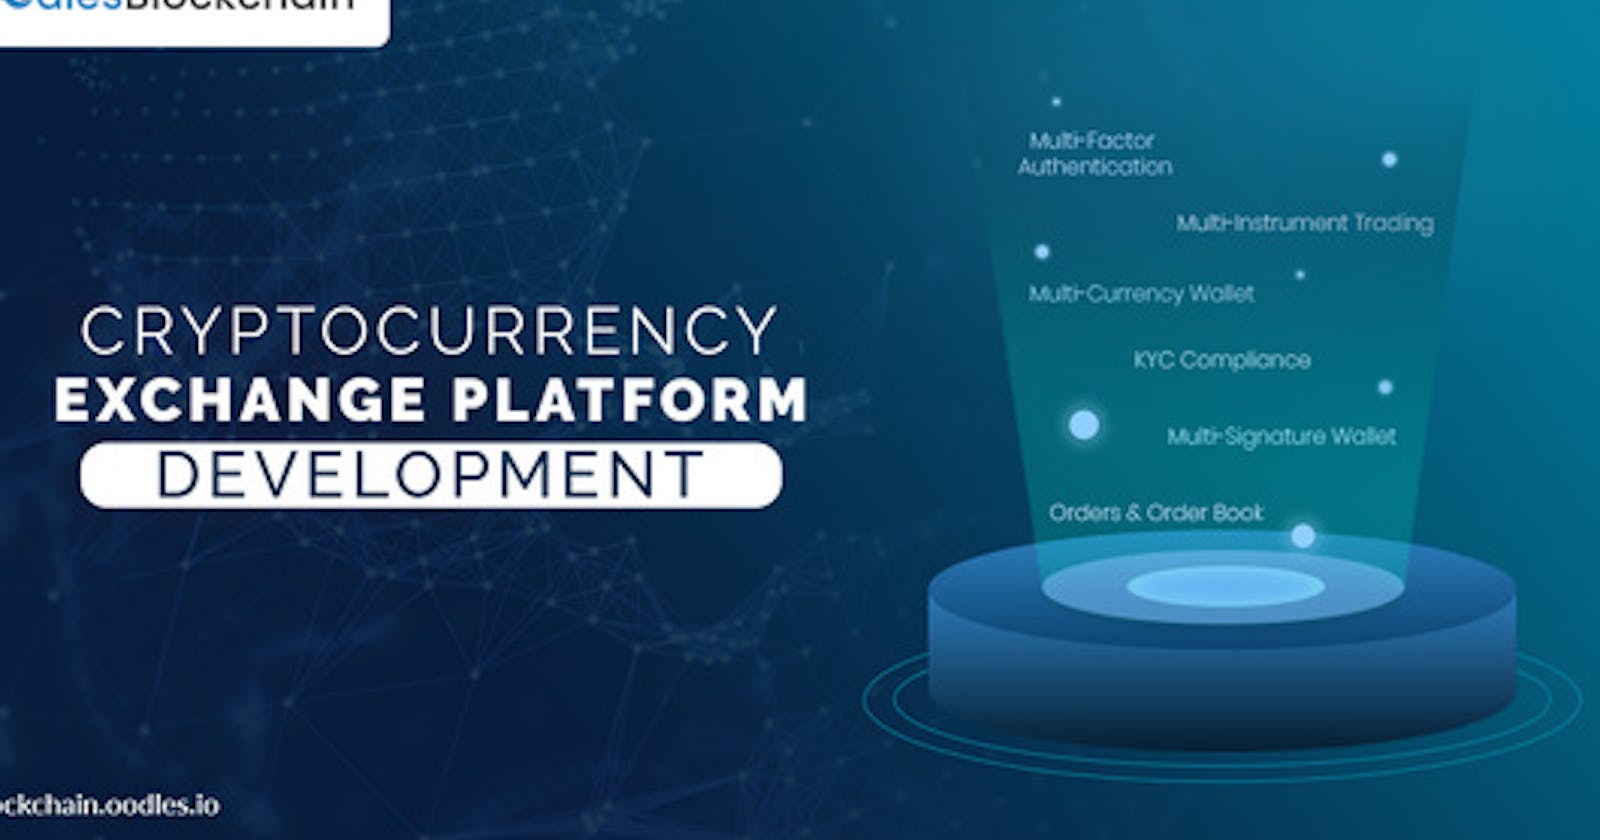 Cryptocurrency Exchange Platform: Architecture, Security, and Features